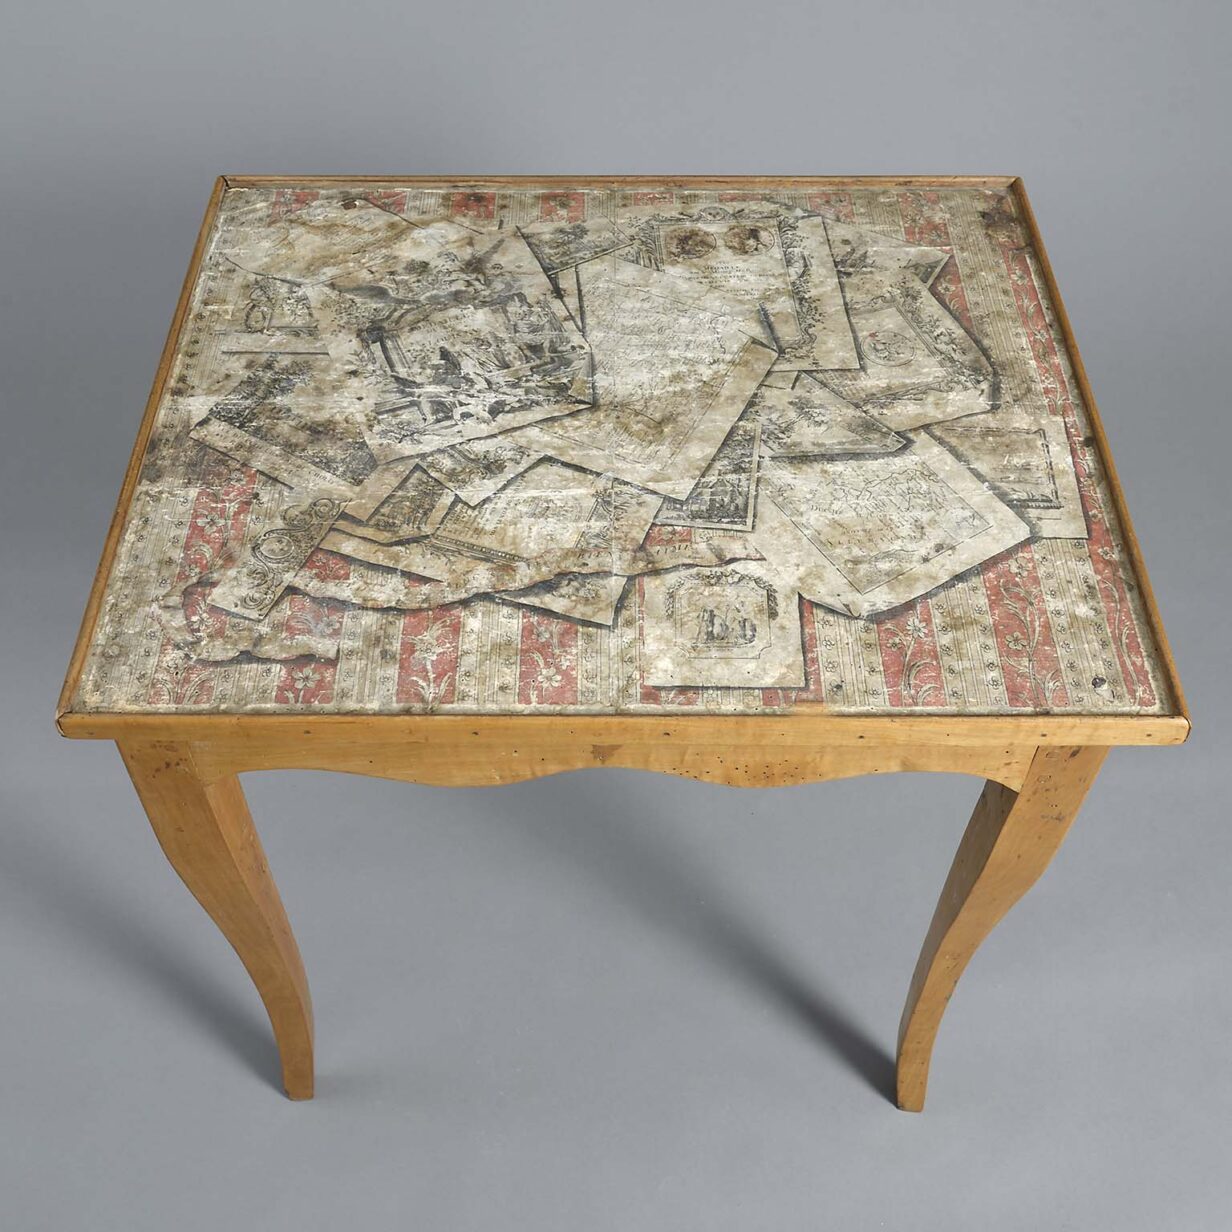 18th century trompe-l'œil topped occasional table